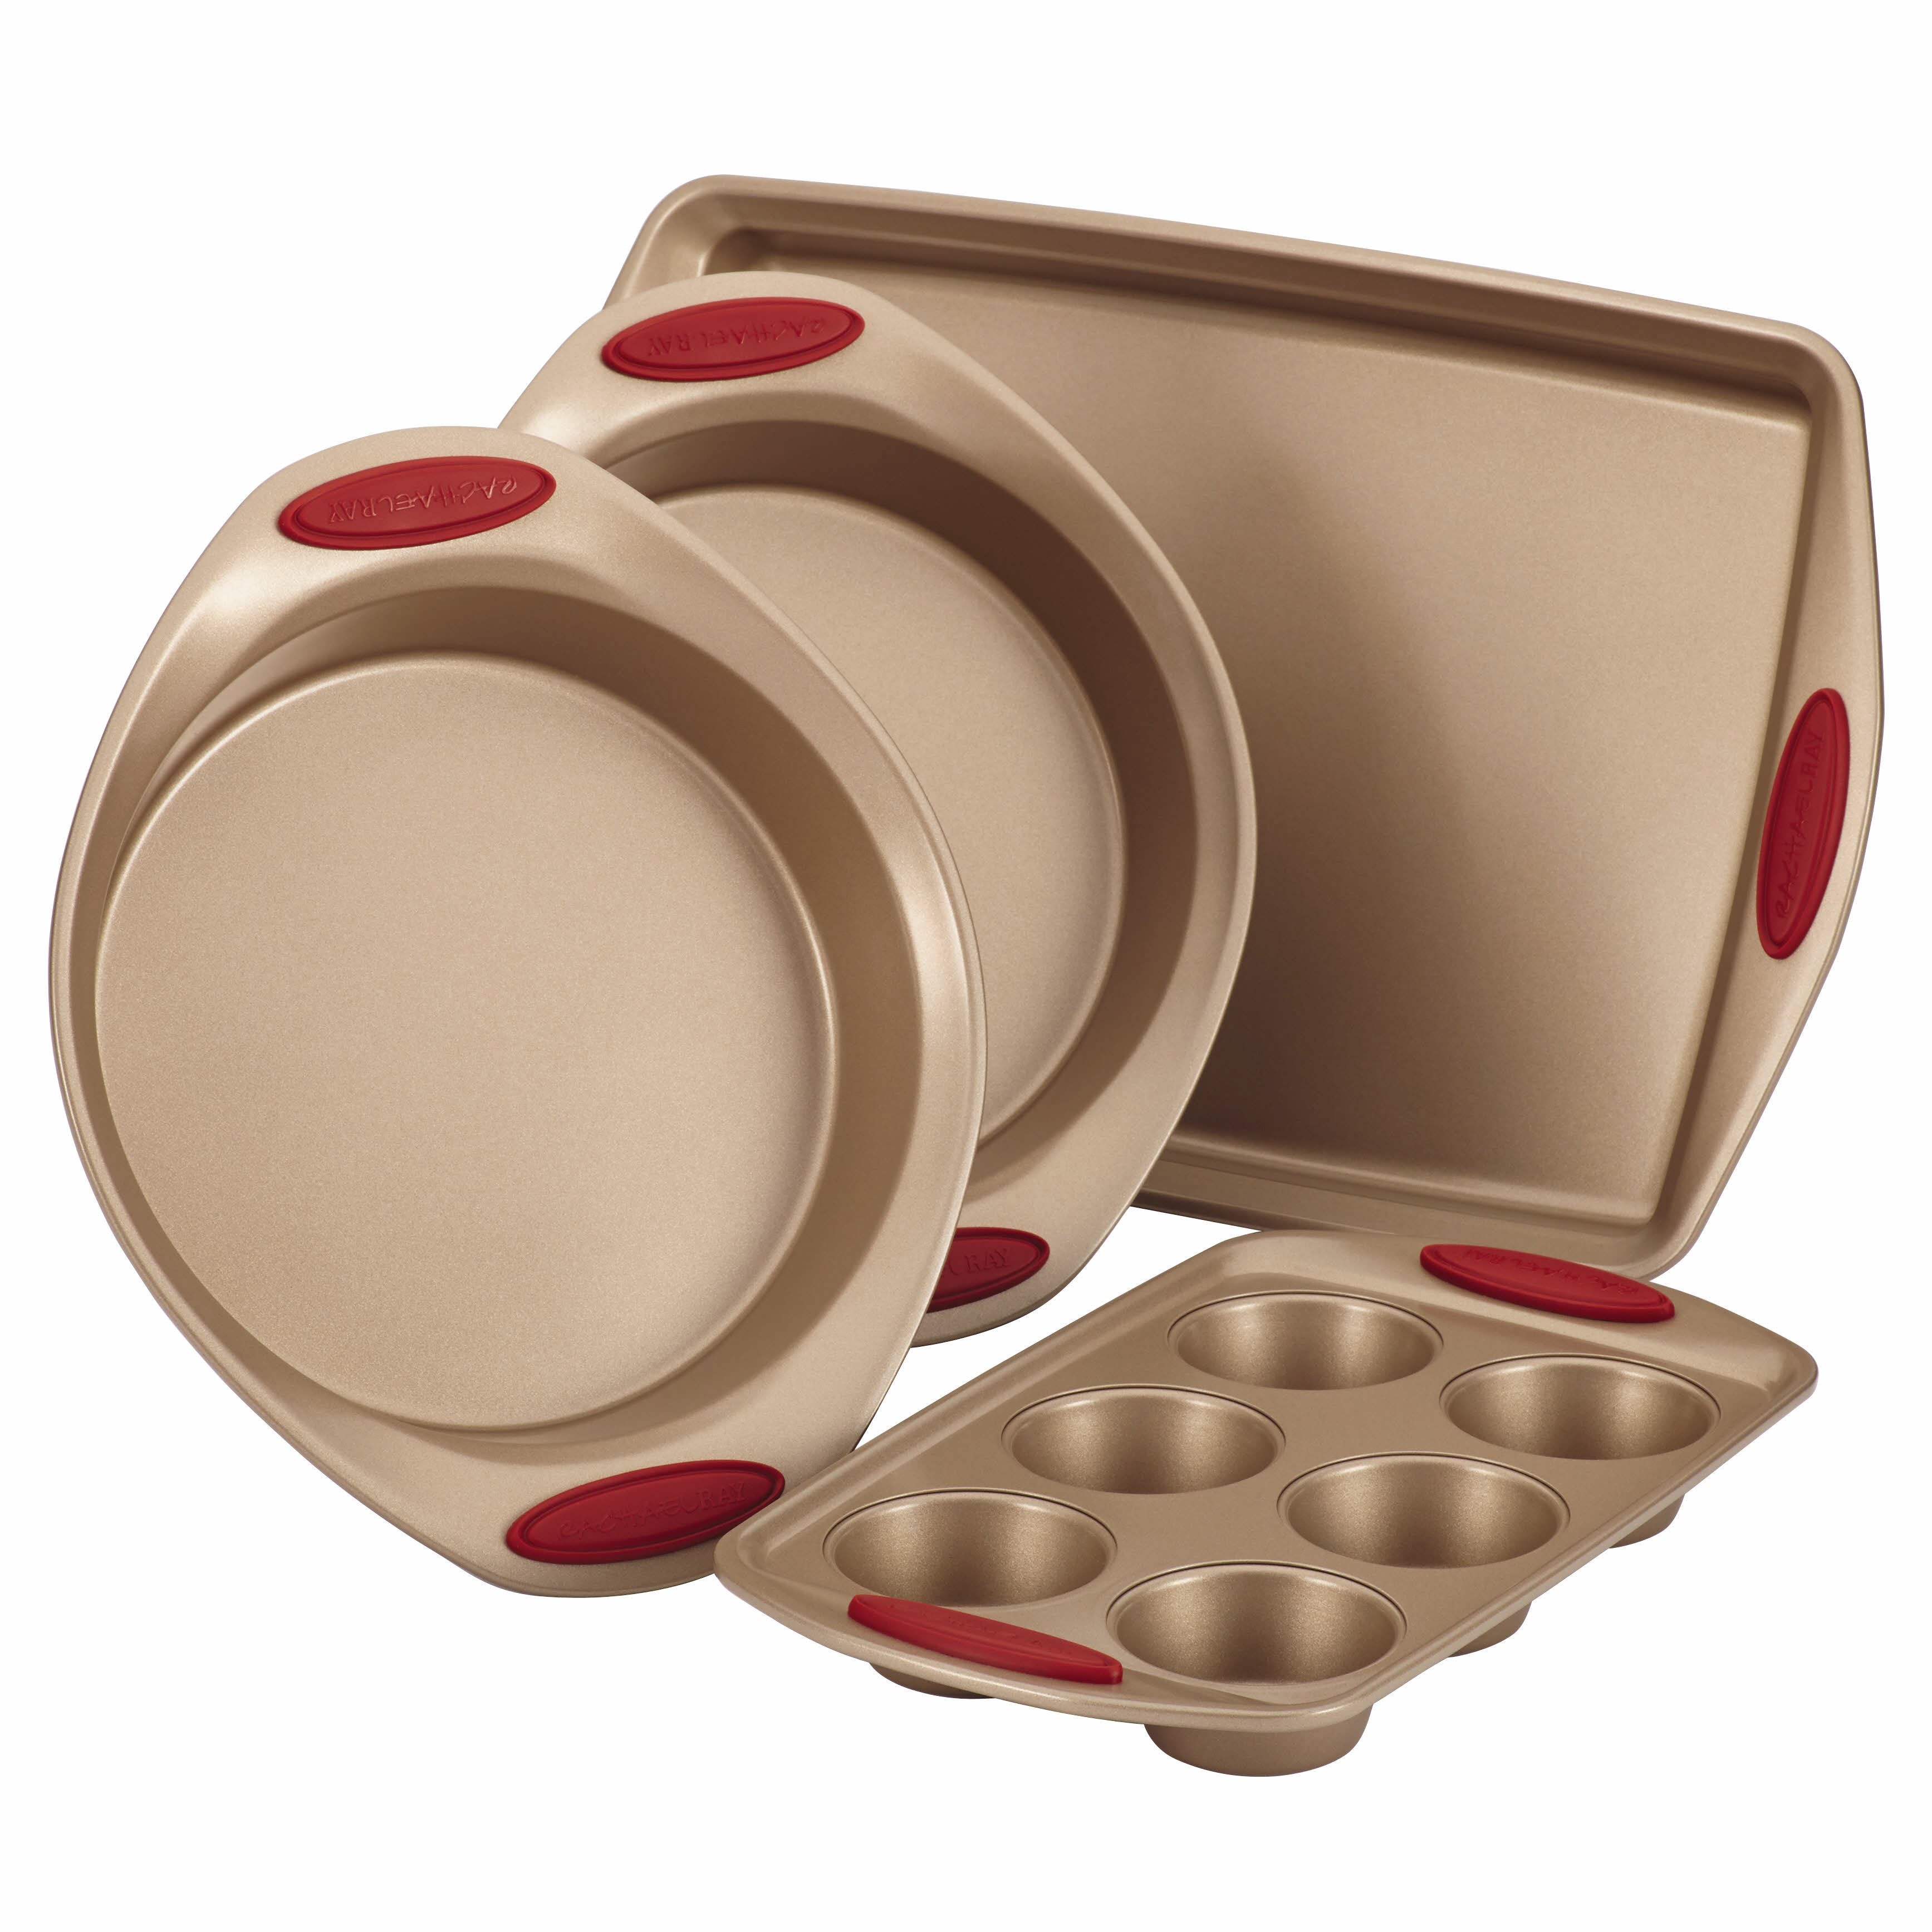 4pc Cucina Bakeware Set Cranberry Red